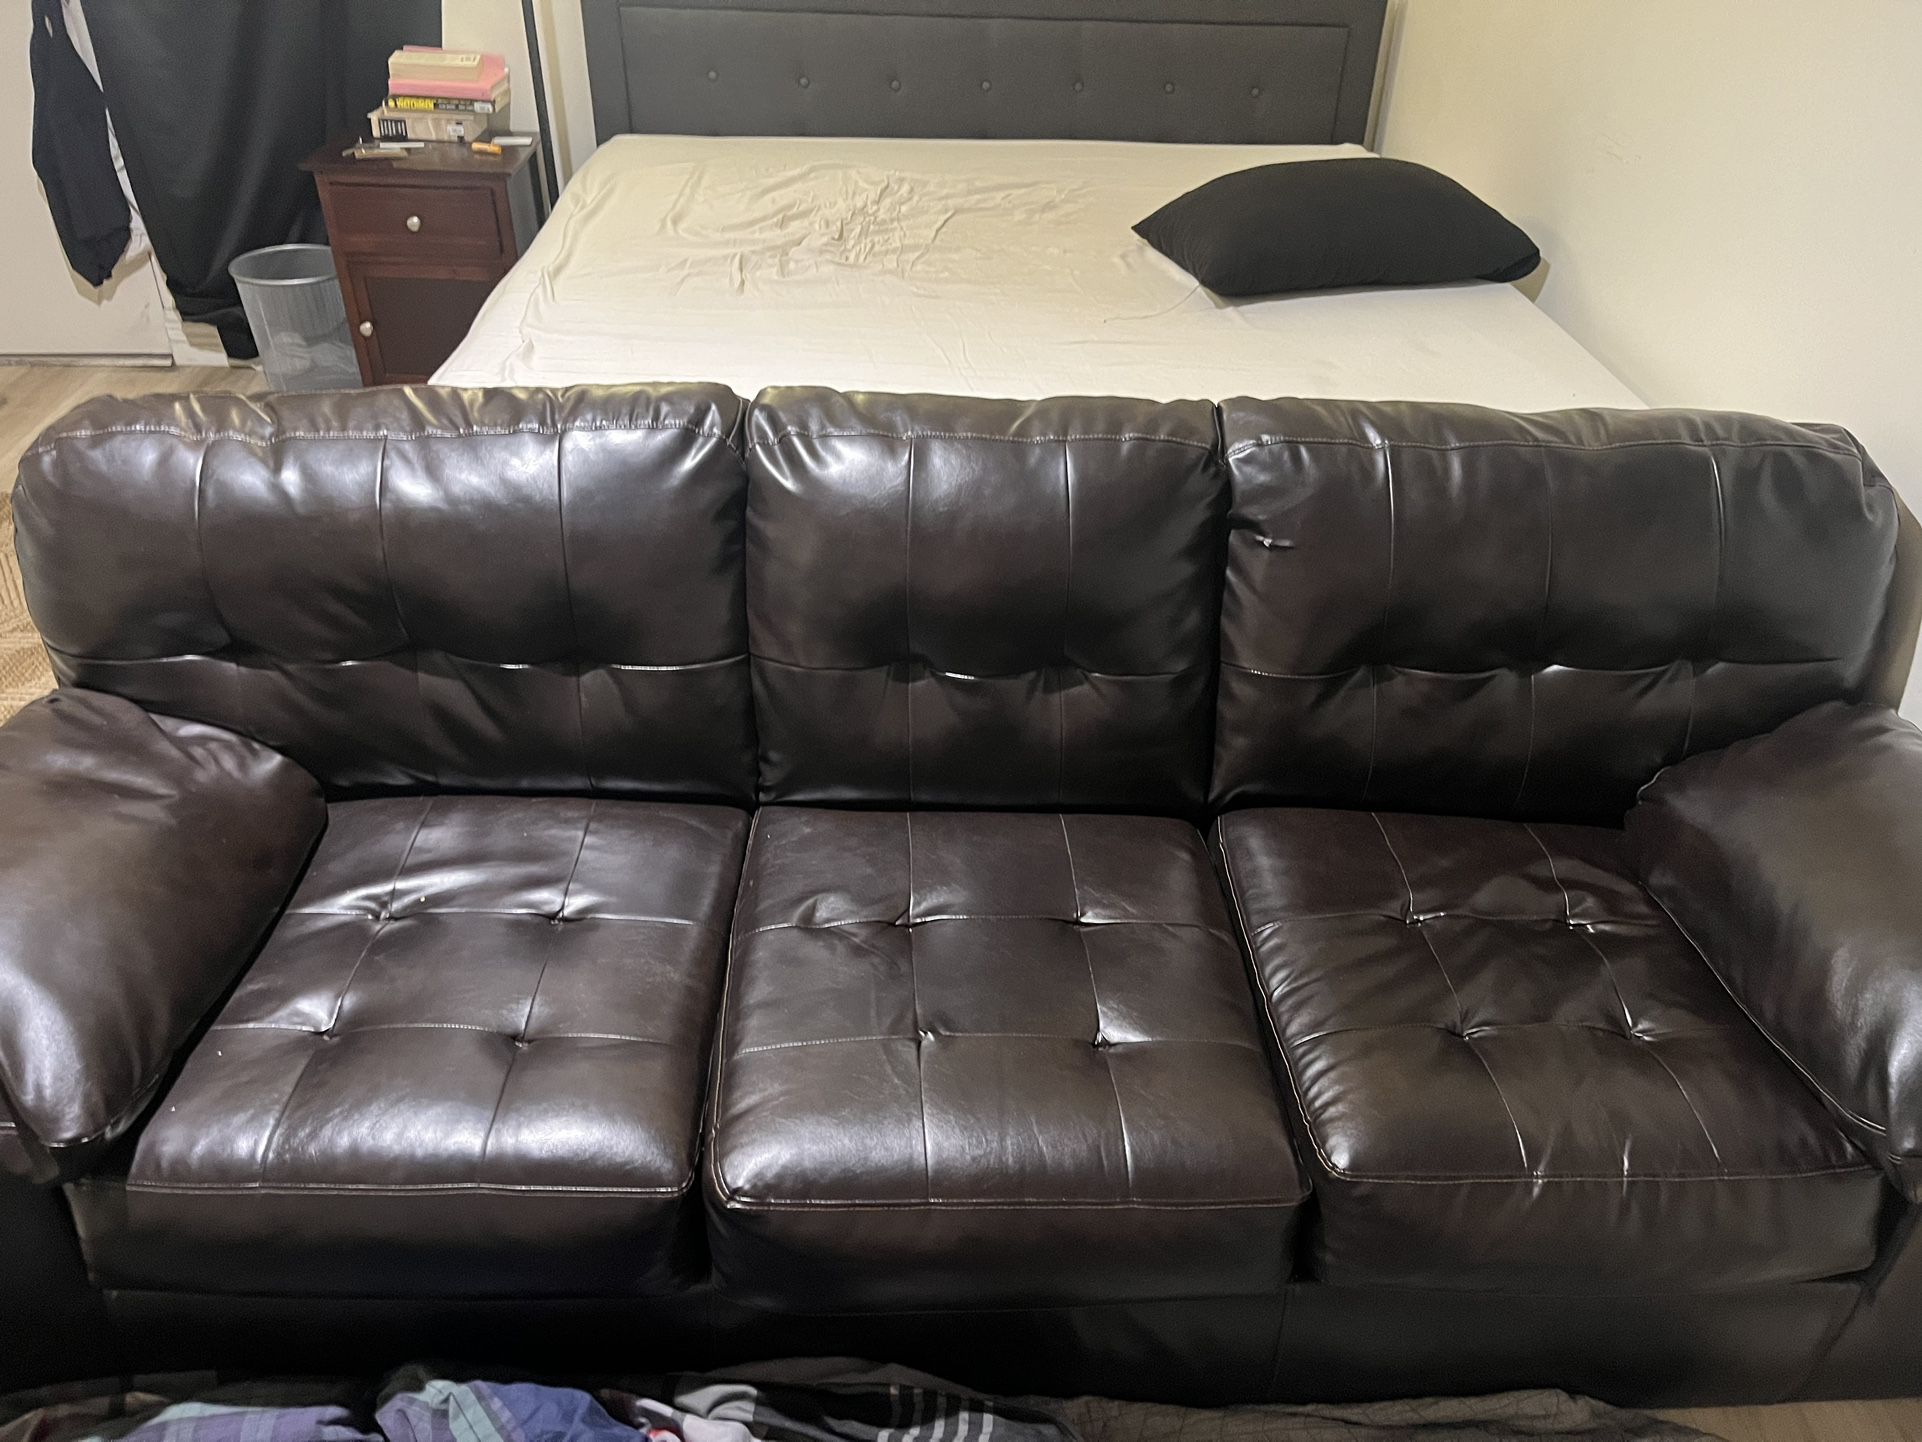 Free Couch. Big couch. Good couch.